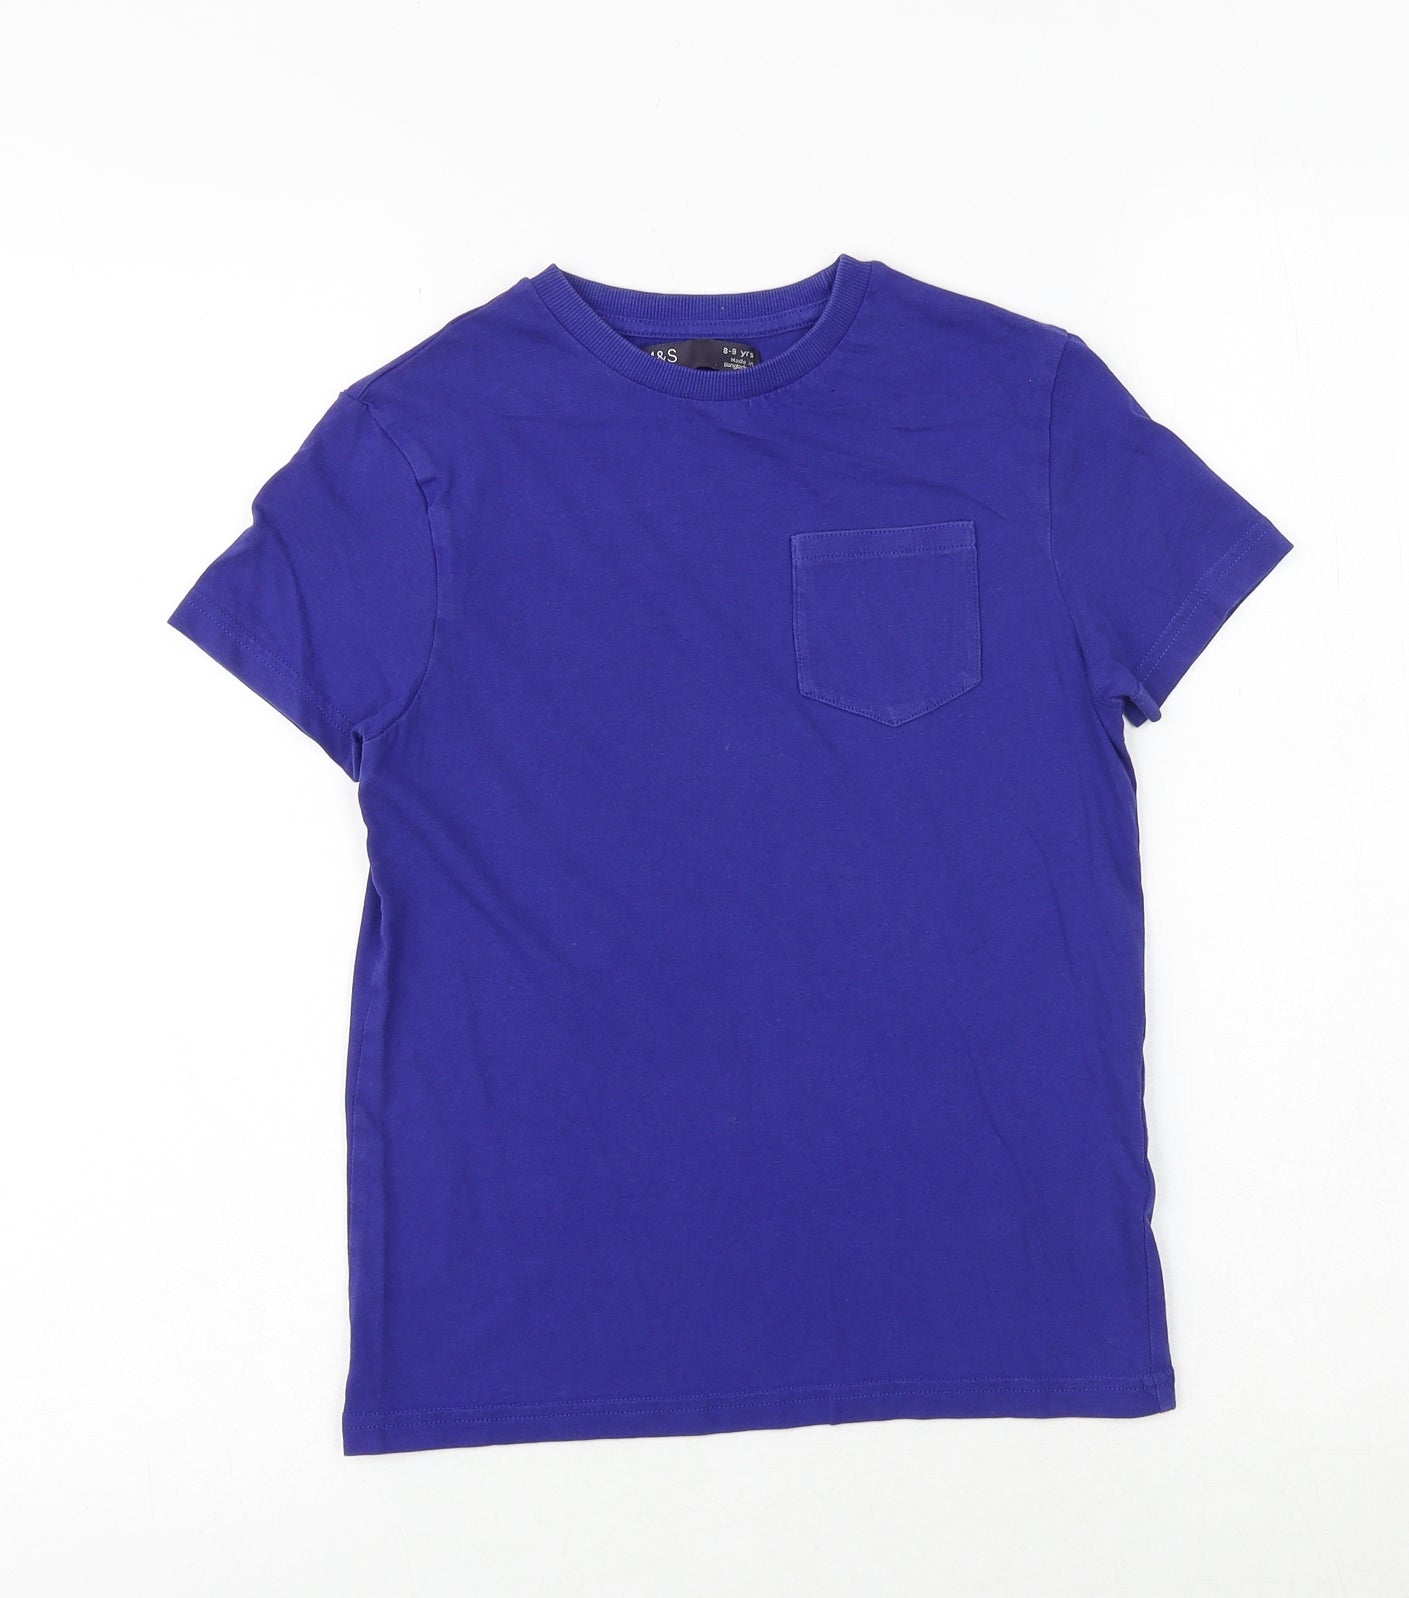 Marks and Spencer Boys Blue 100% Cotton Basic T-Shirt Size 8-9 Years Round Neck Pullover